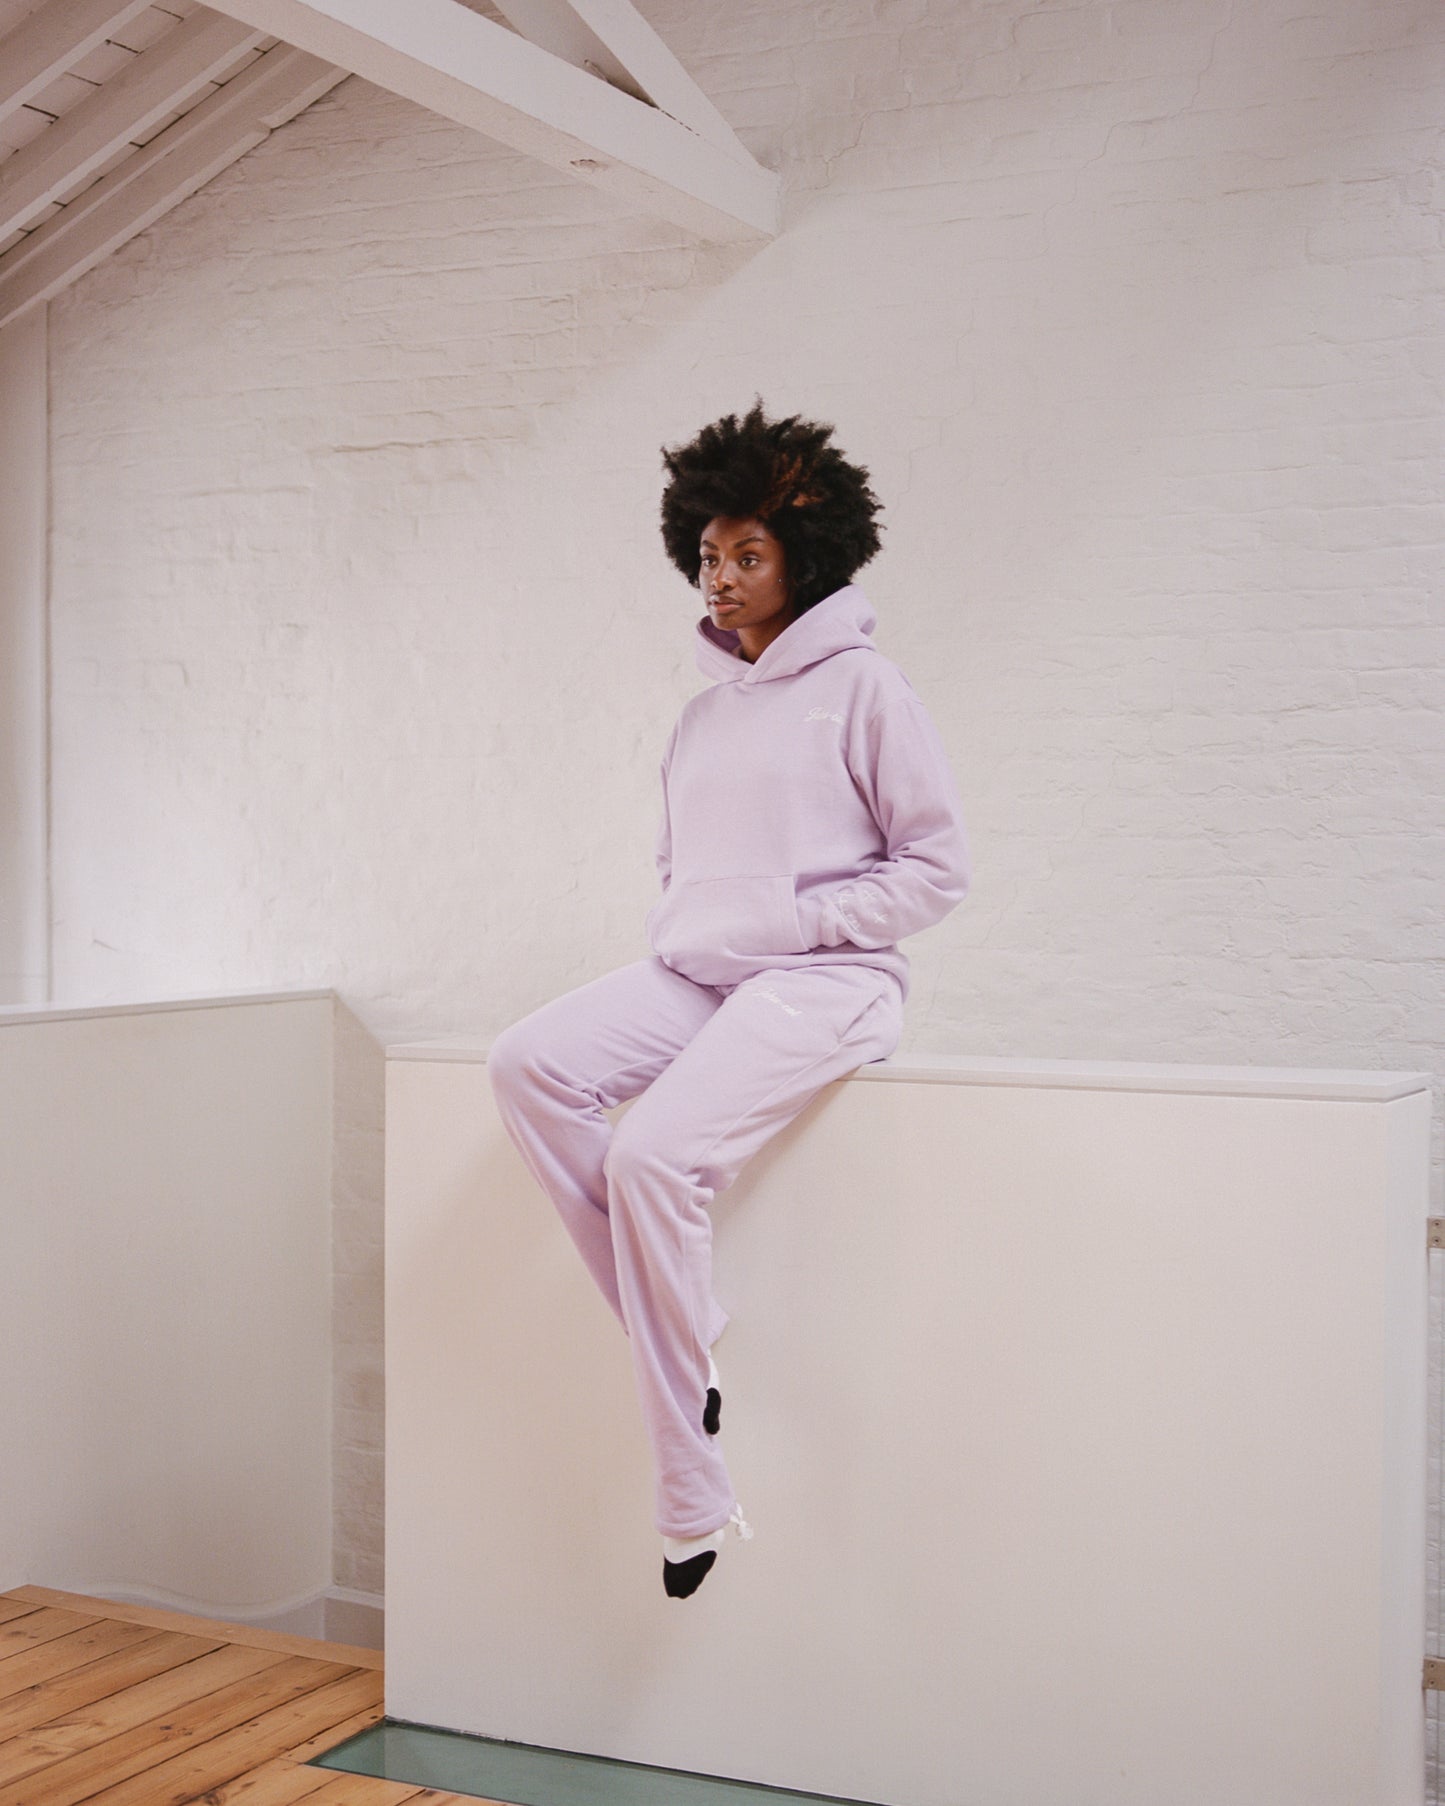 *SALE* CLASSIC TILL FOREVER HOODIE (LILAC)